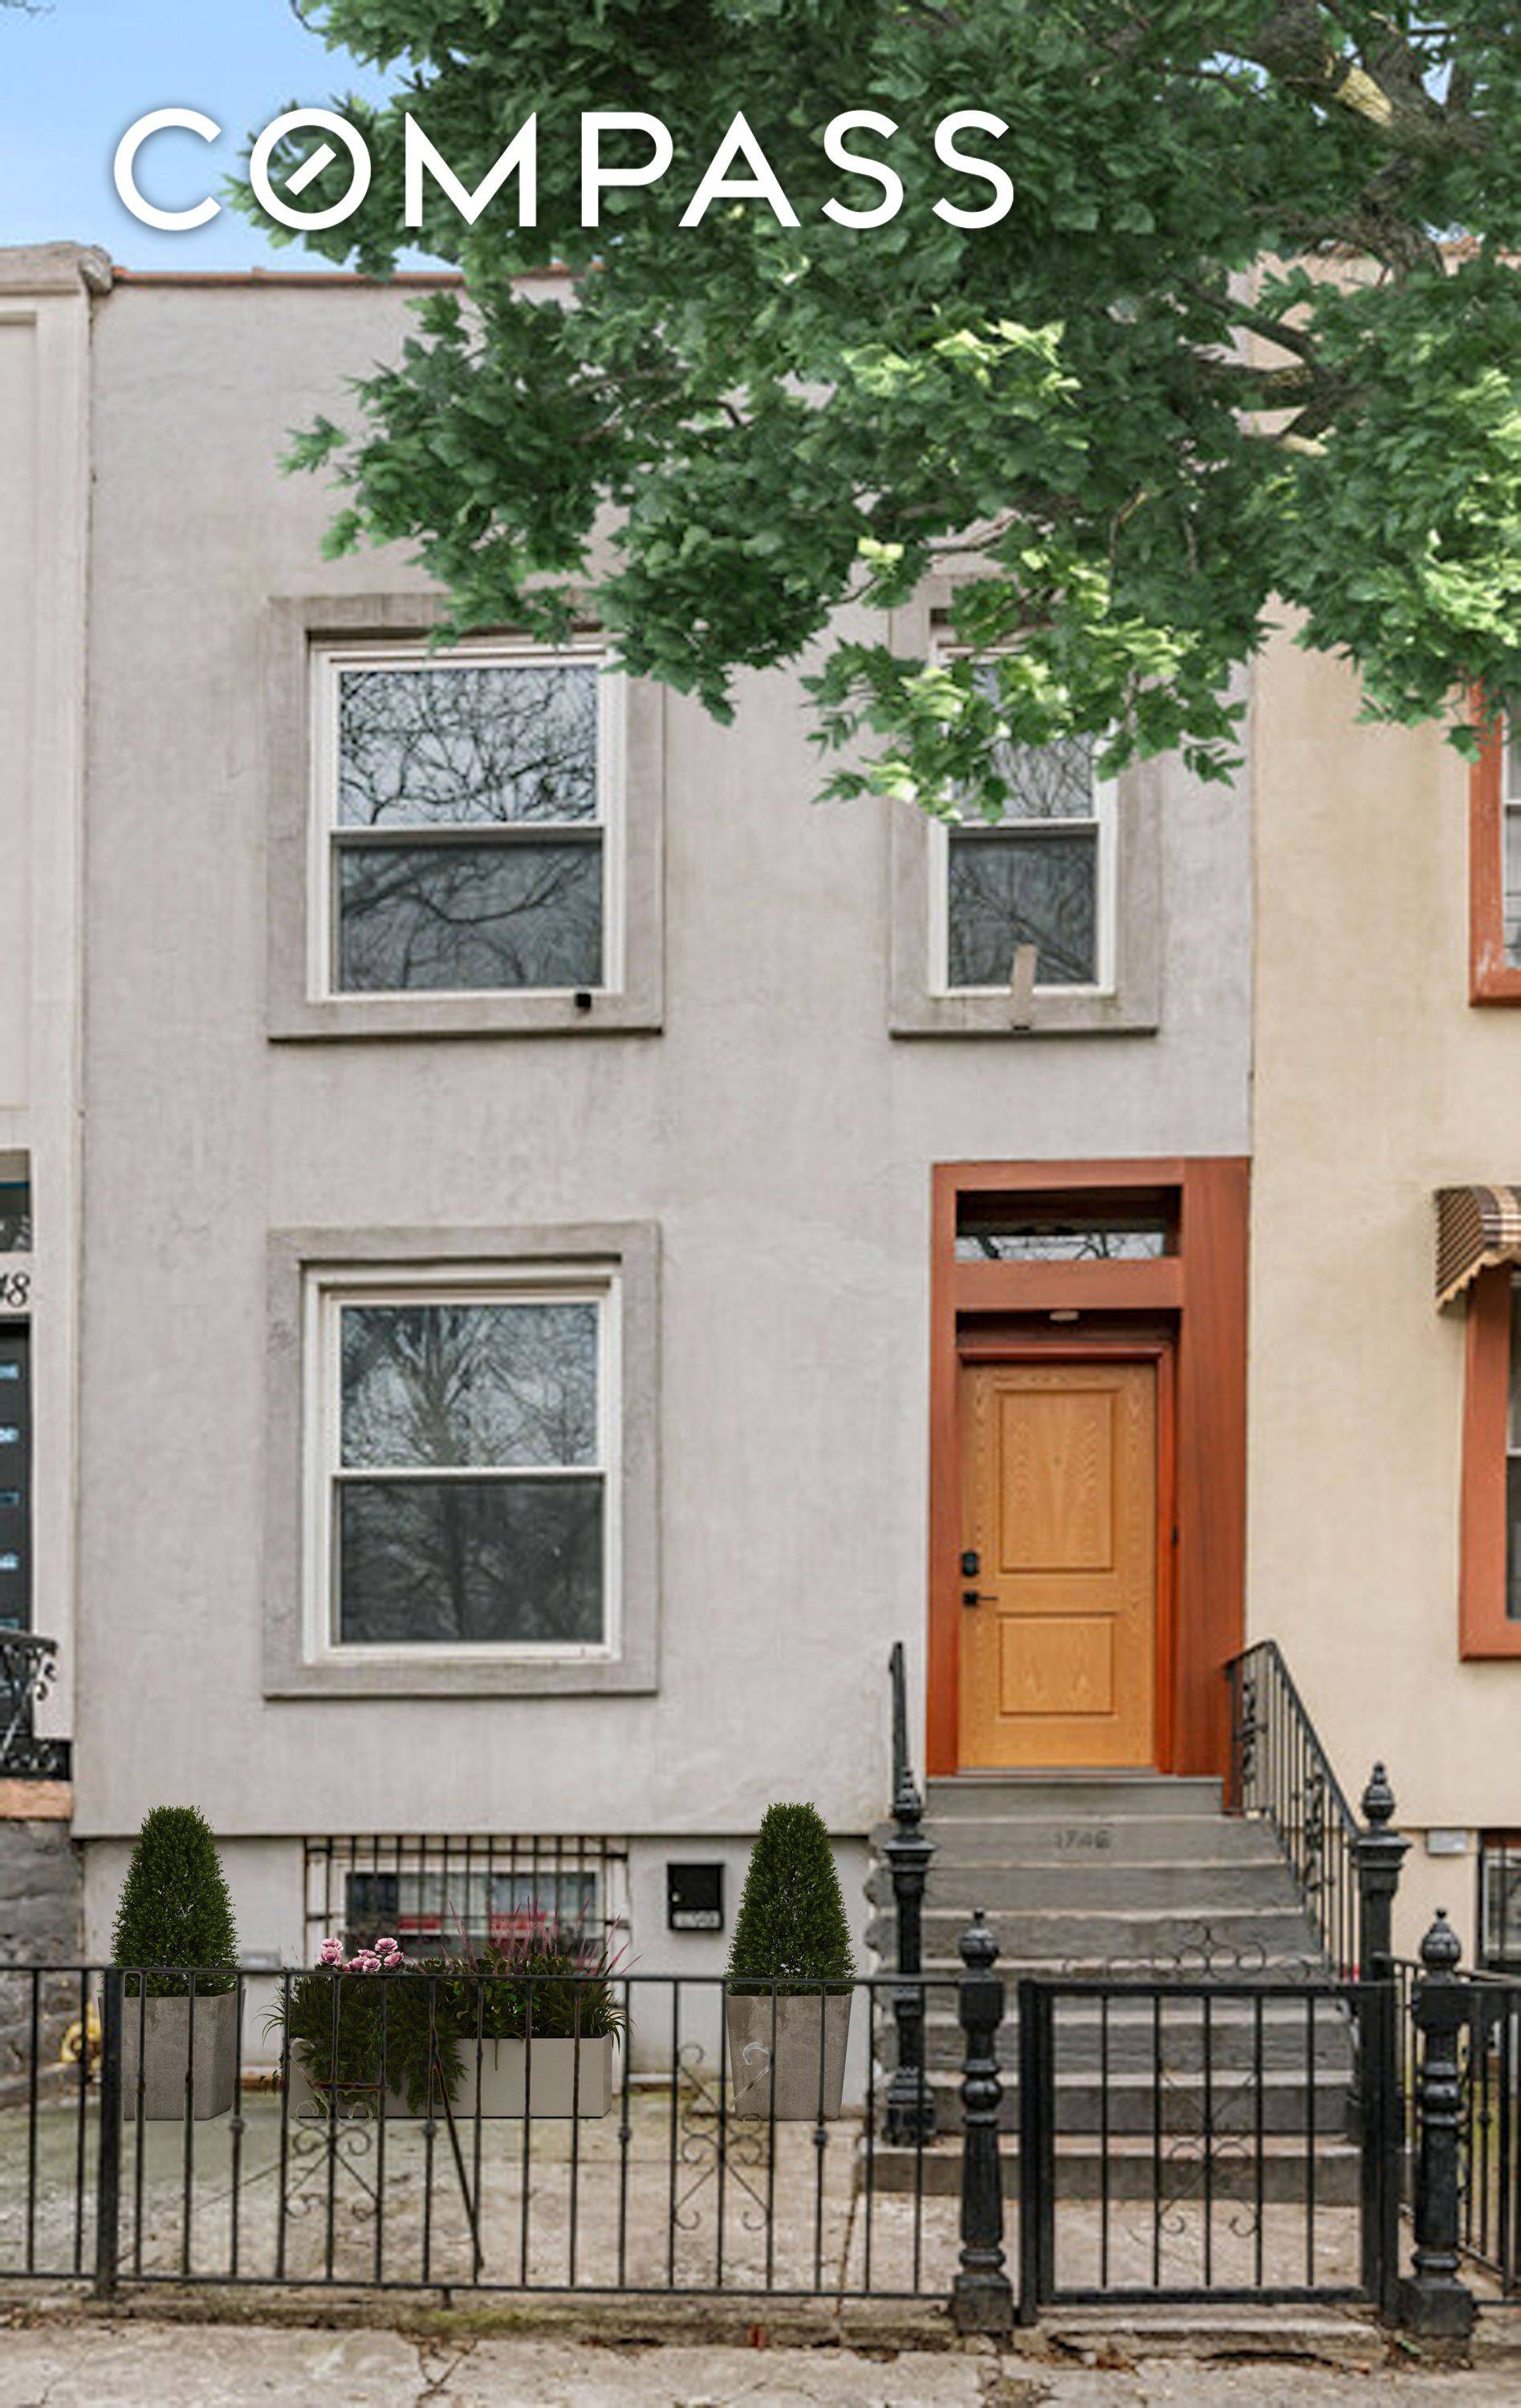 Welcome to 1746 Bergen Street, a modern renovated two family townhouse in Crown Heights.